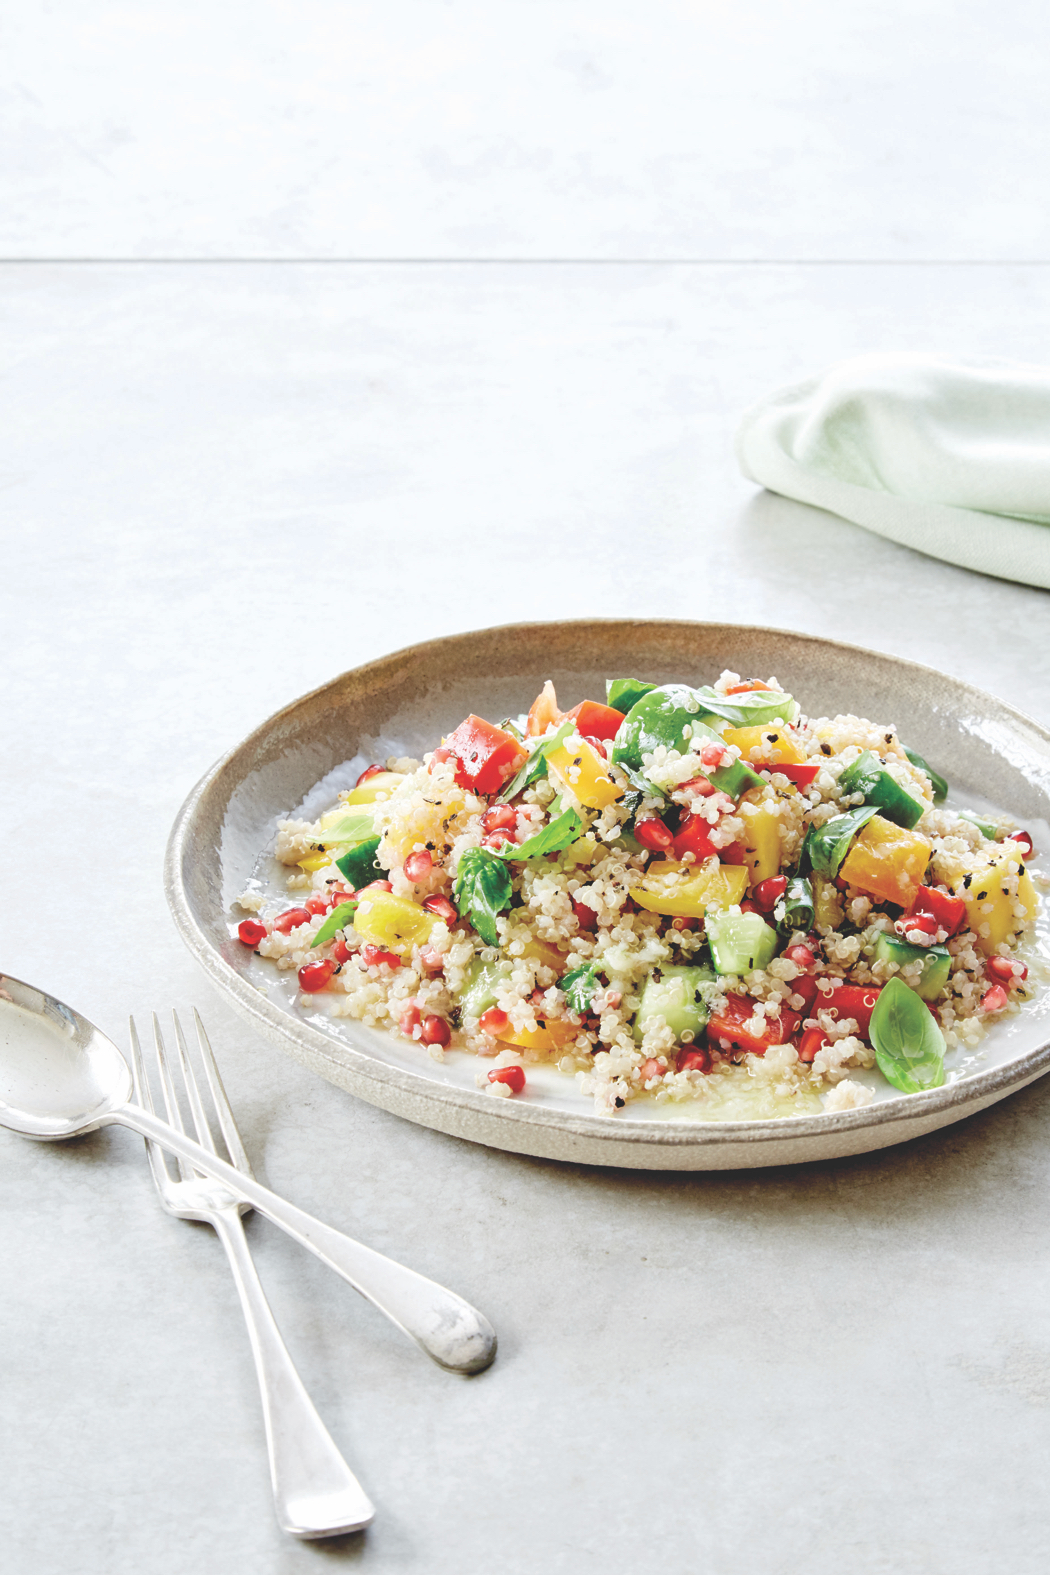 Quinoa Flakes, Flour and Seeds Rena Patten recipe for Mango and Pomegranate Salad